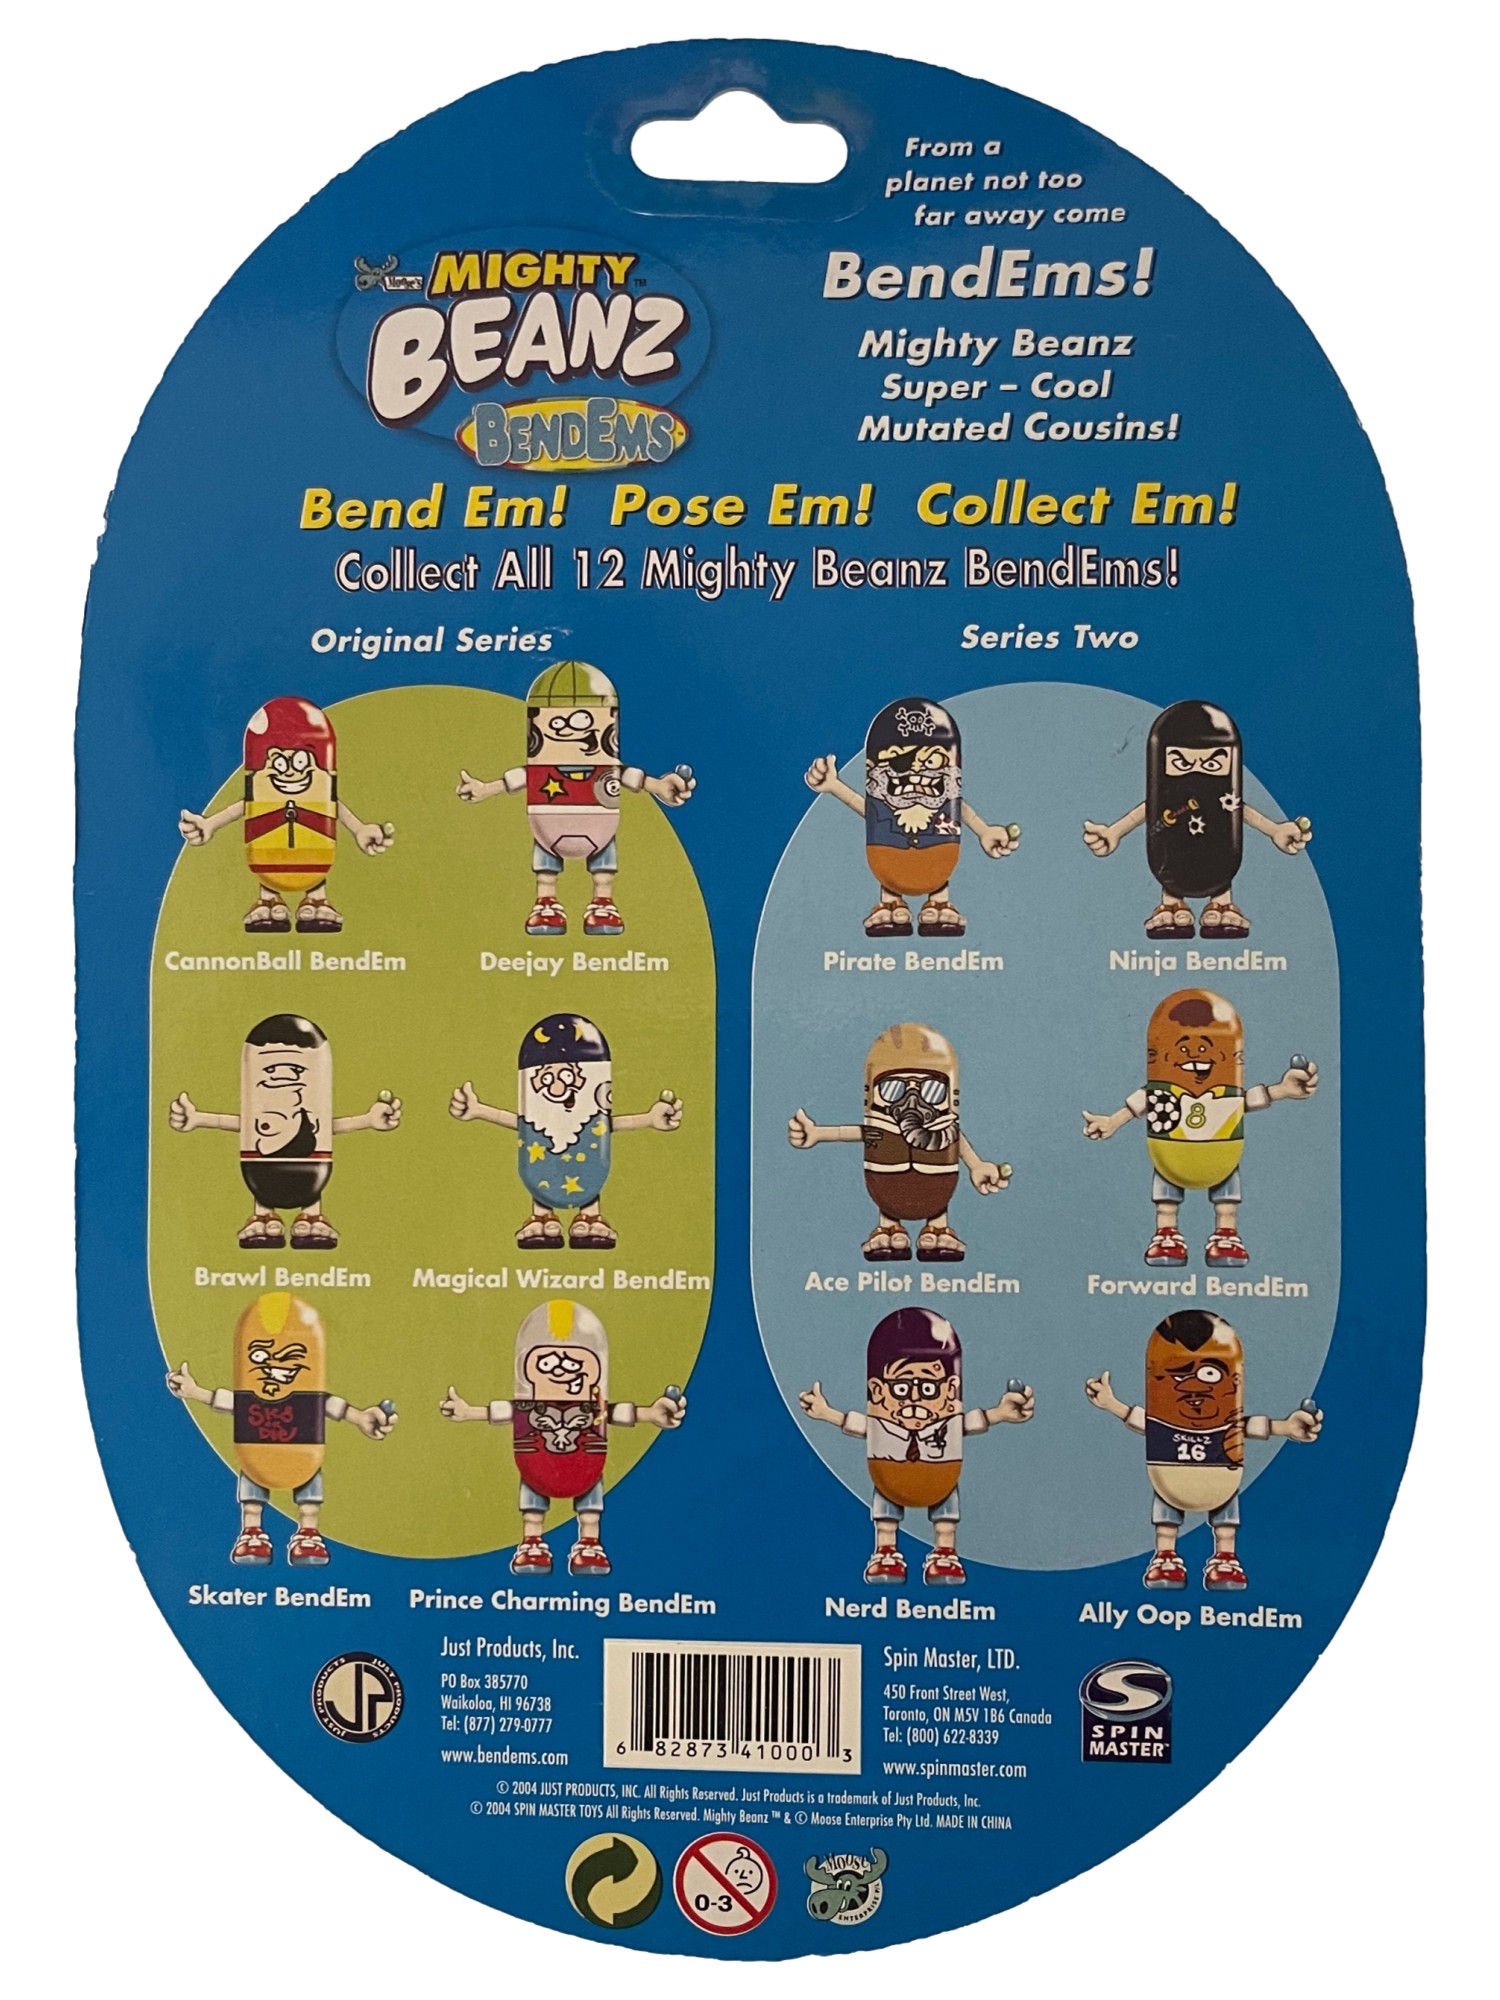 Mighty Beanz BendEms Collectible Ninja BendEm Beanz Series Two Blue Pk - image 2 of 2